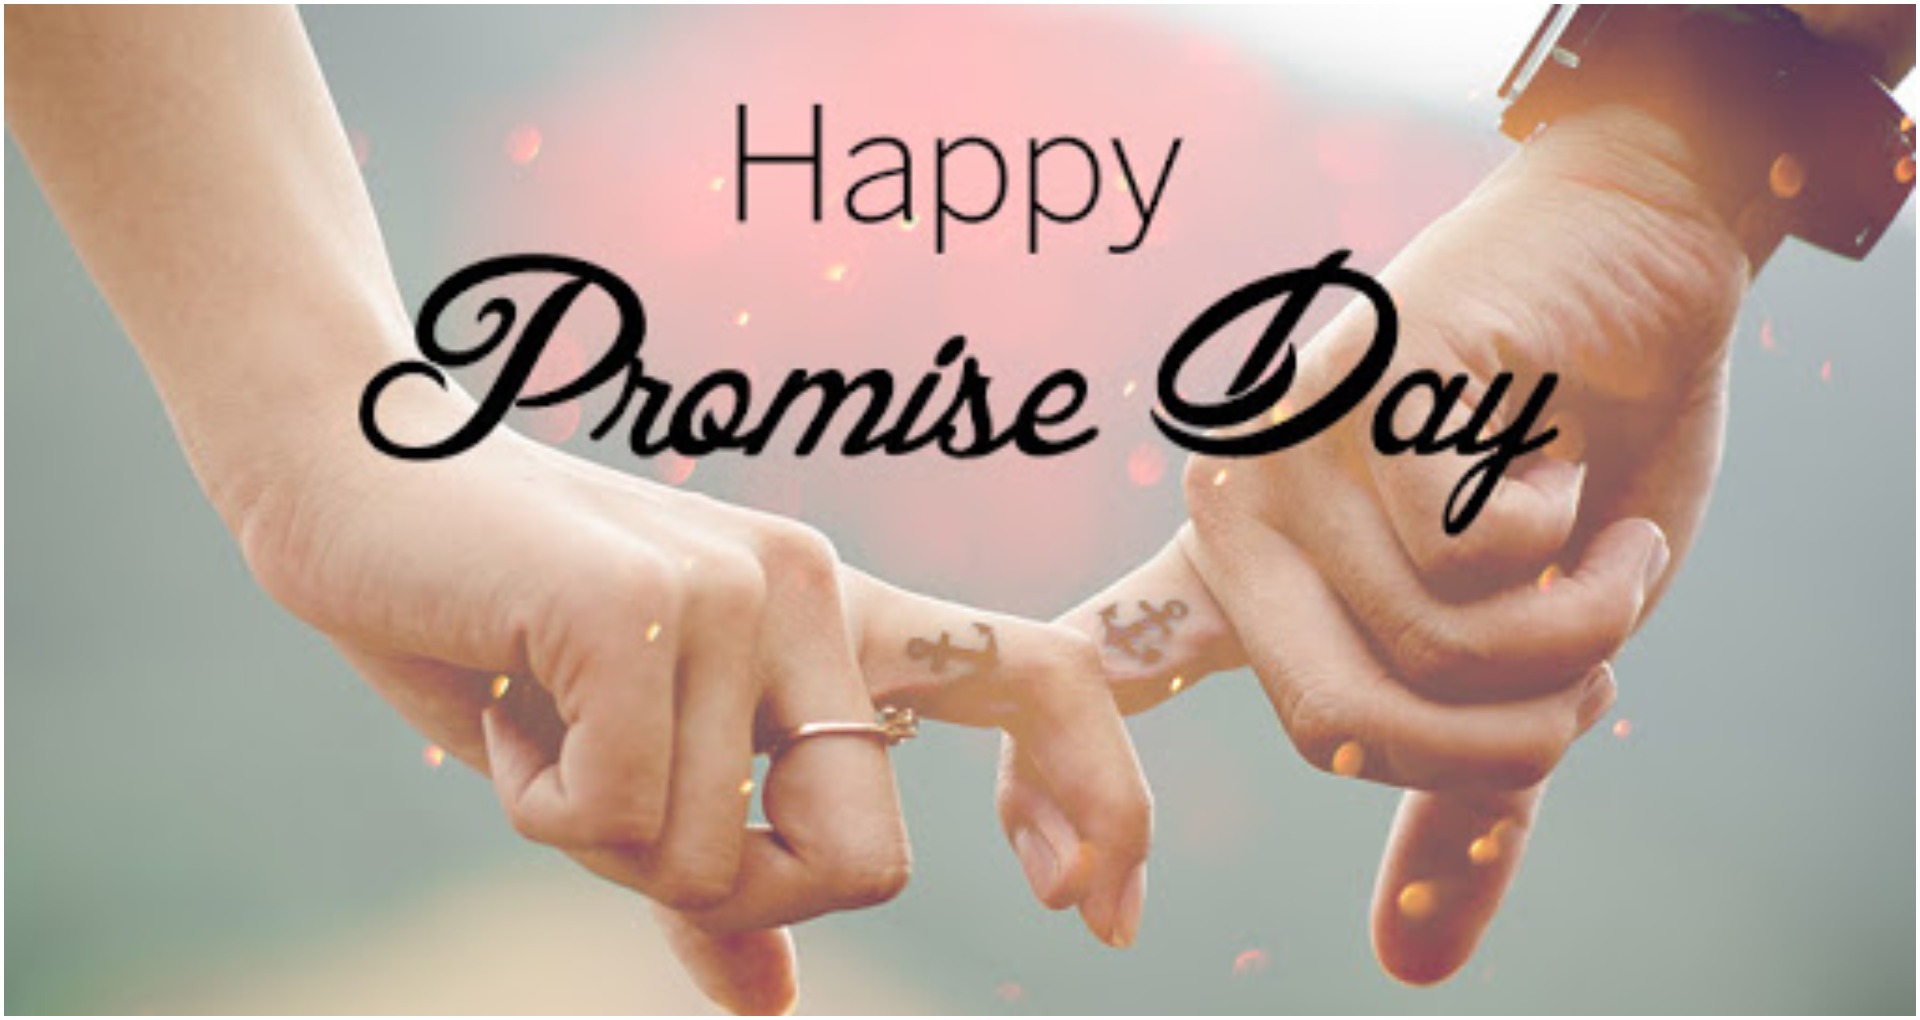 Happy Promise Day 2020 Wishes Images Quotes Shayari Wishes Promise Day  Status Wallpapers Sms Promise Day Kab Hai Valentine Week Day List 2020 -  Happy Promise Day 2020 Wishes: इन रोमांटिक शायरी